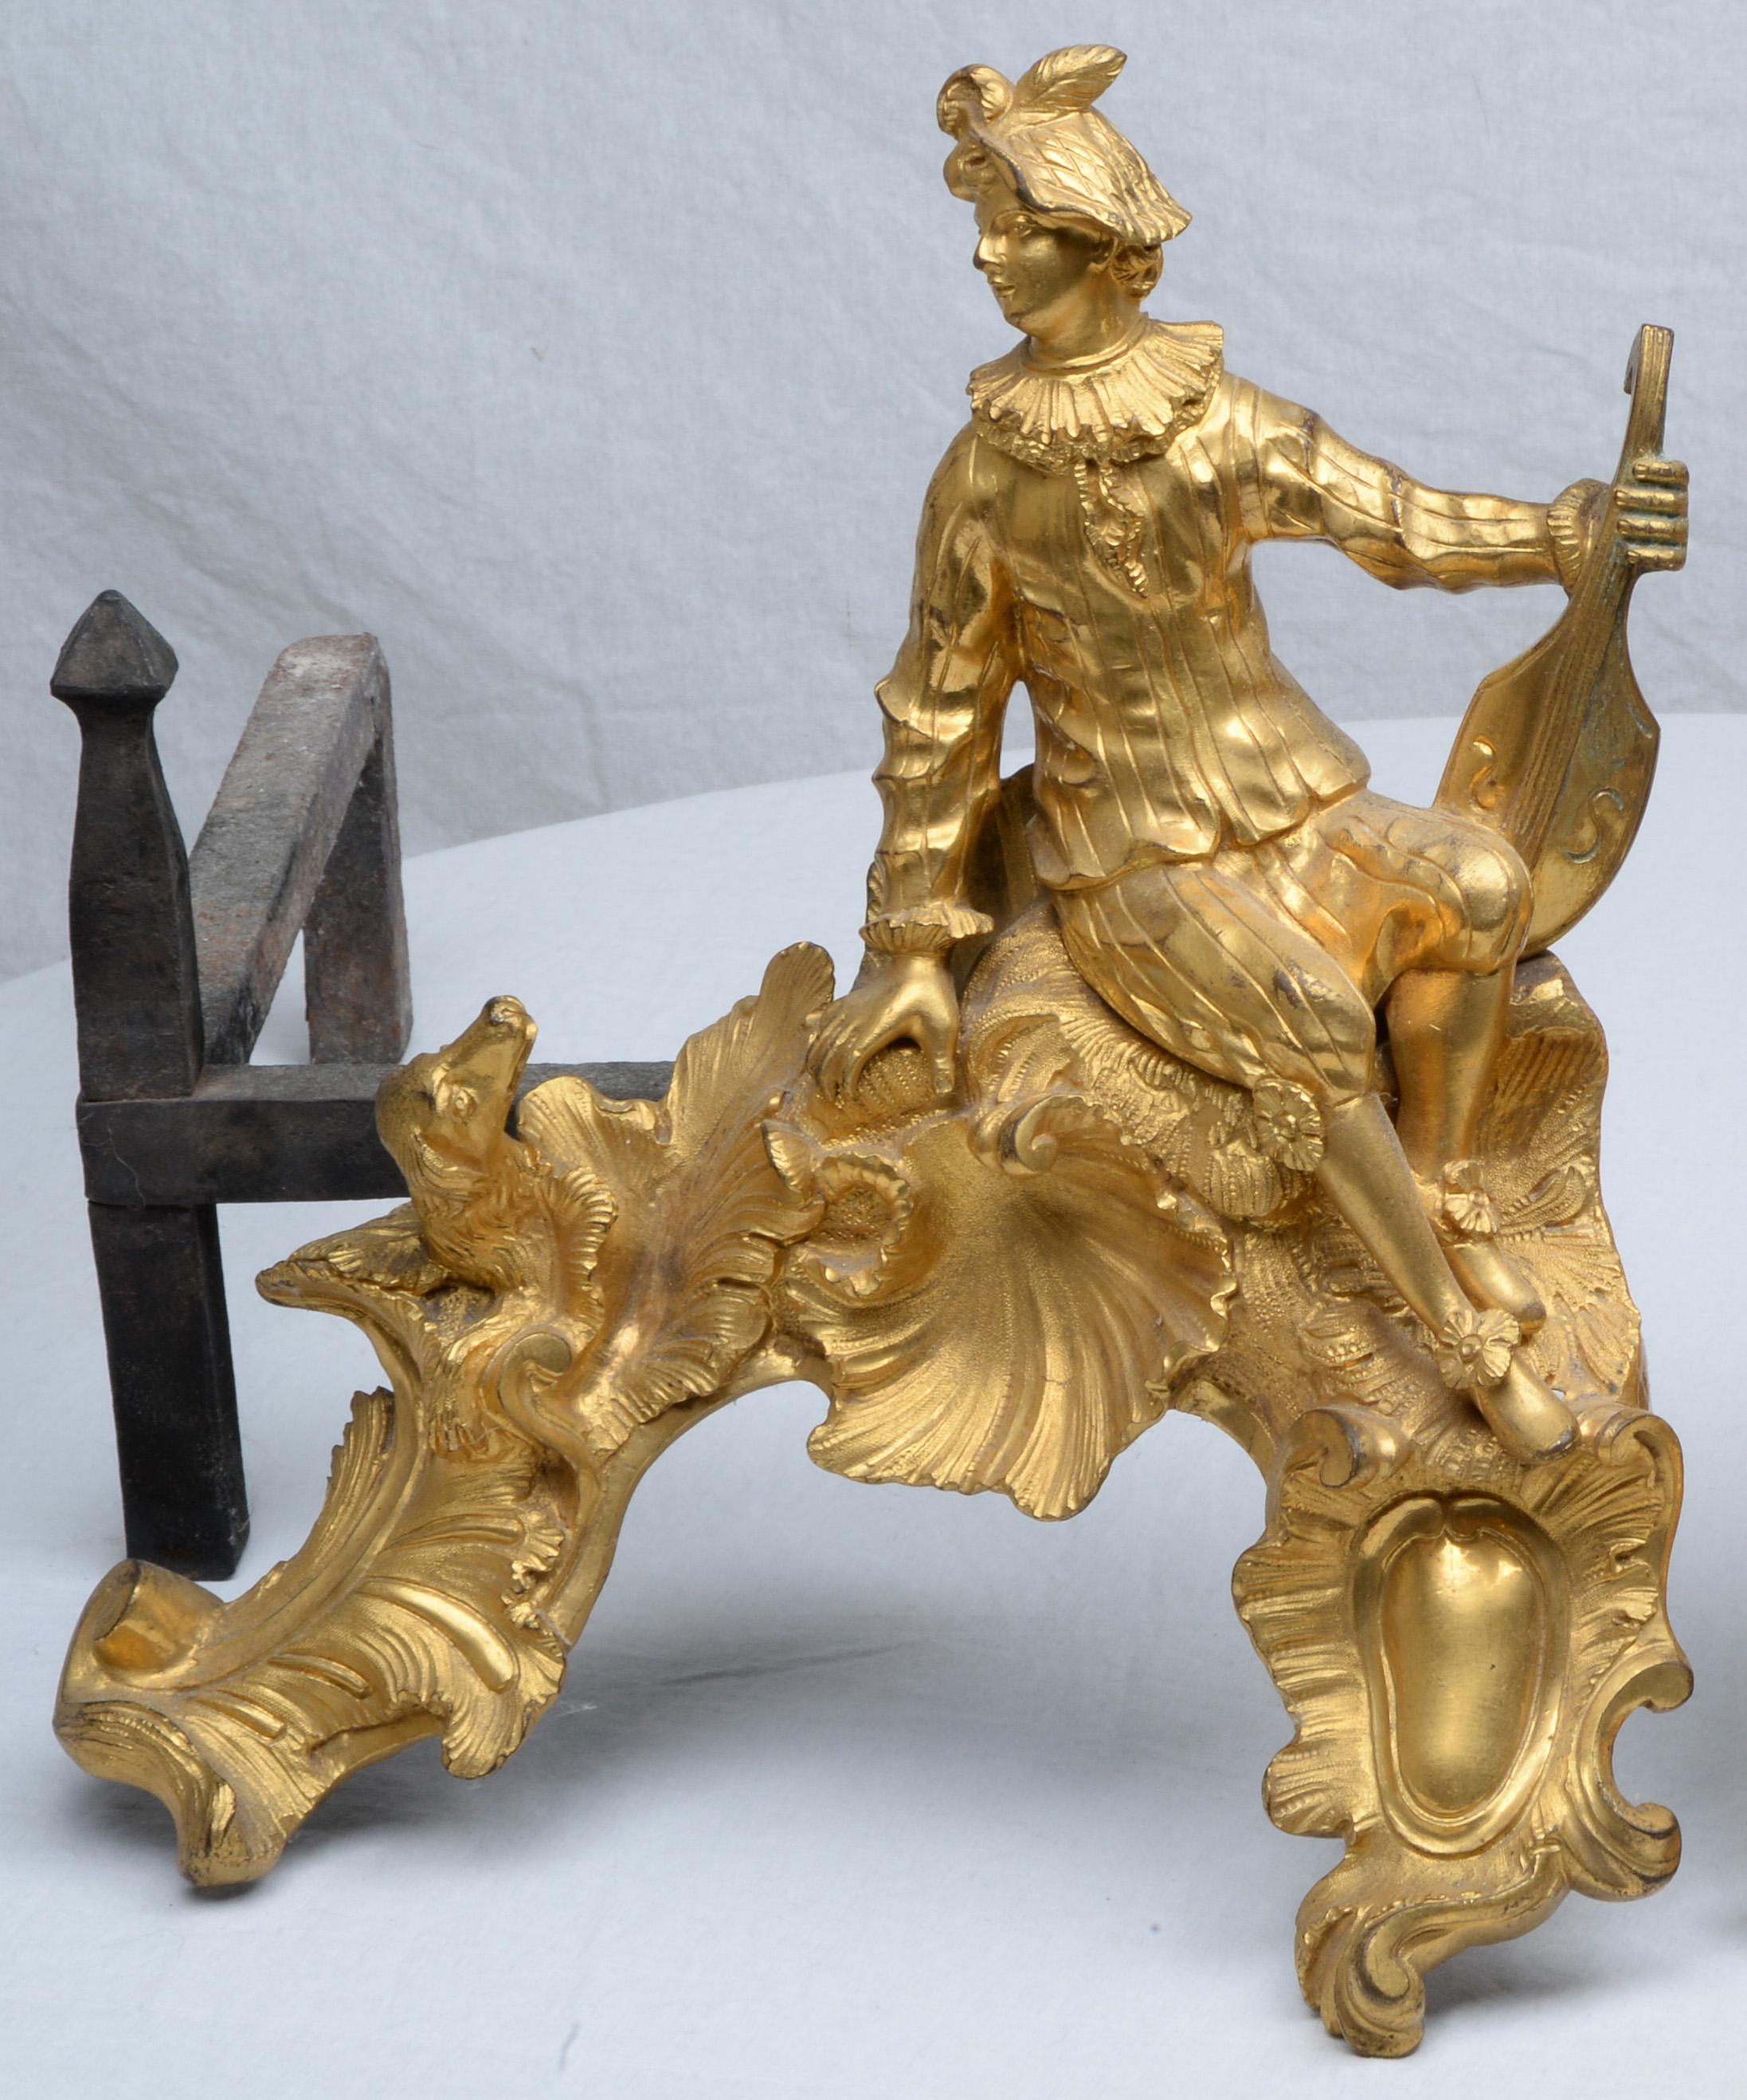 Pair of Louis XV Ormolu Andirons, depicting a seated gallant with a guitar and his companion, each with a dog looking up and rocaille scrolling. with log rests (dimensions include the log rests).

With their asymmetrical forms, the scrolling foliage